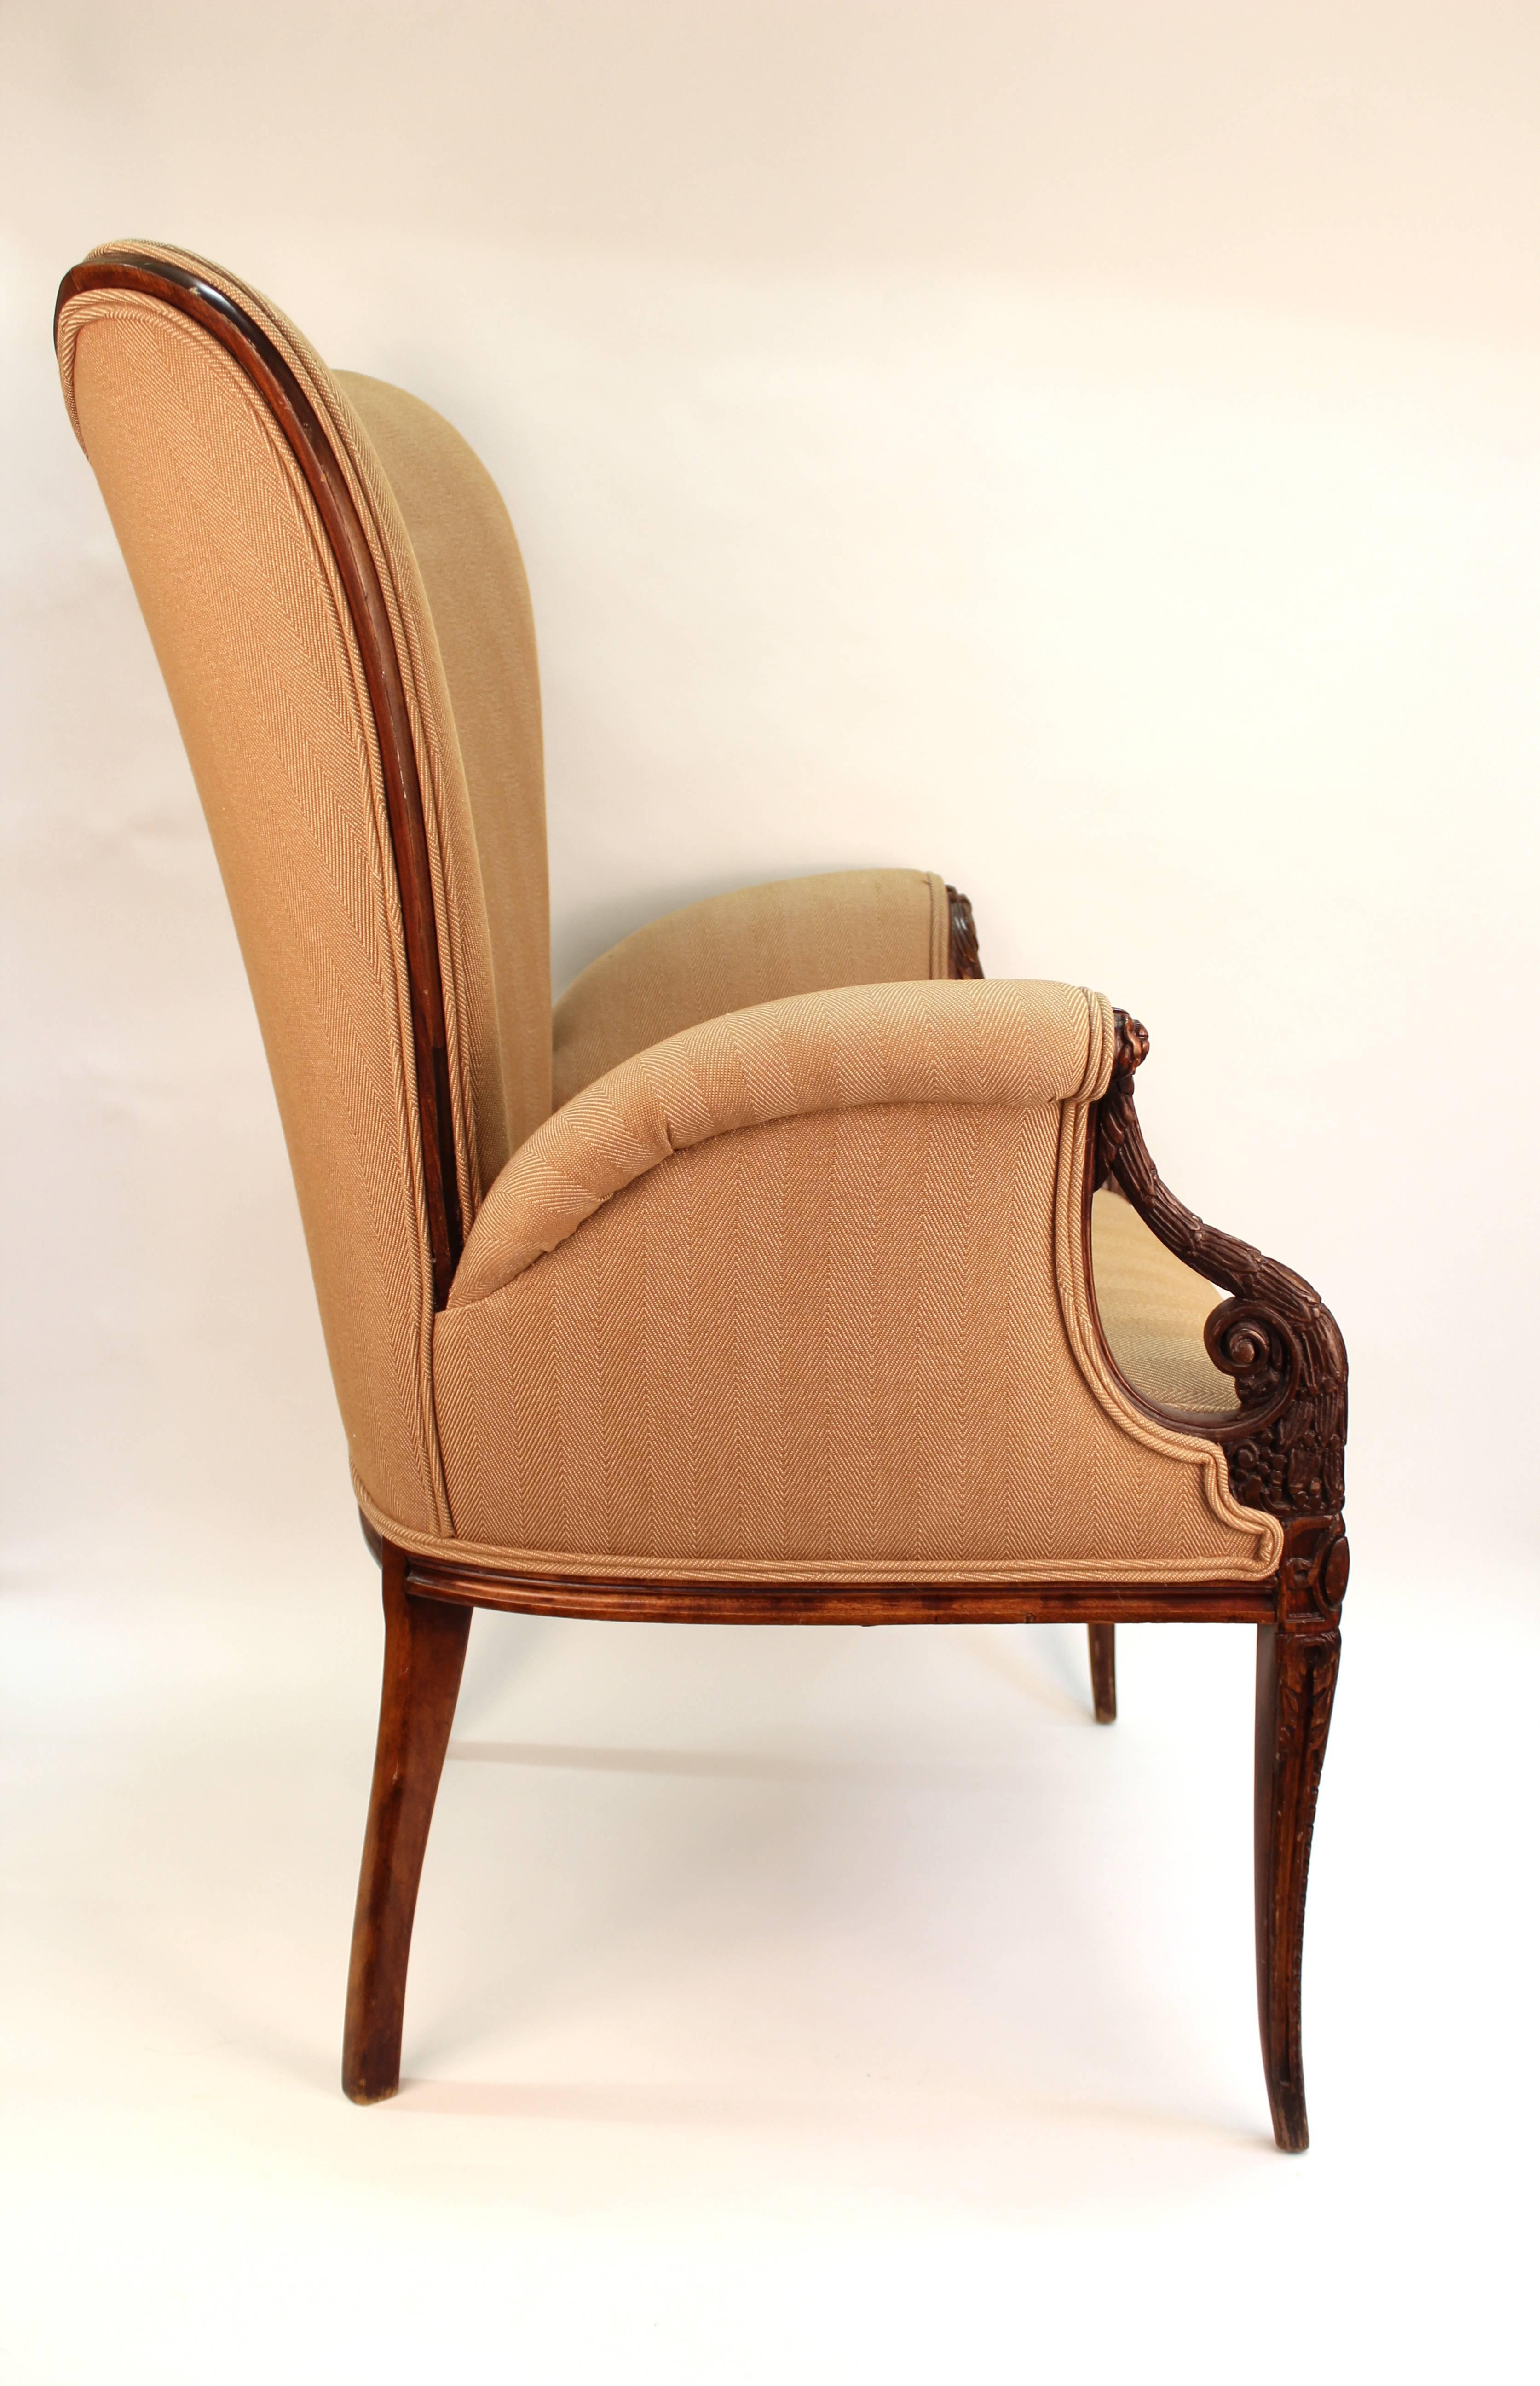 Neoclassical Revival Neoclassical Style Grosfeld House Butterfly Armchairs